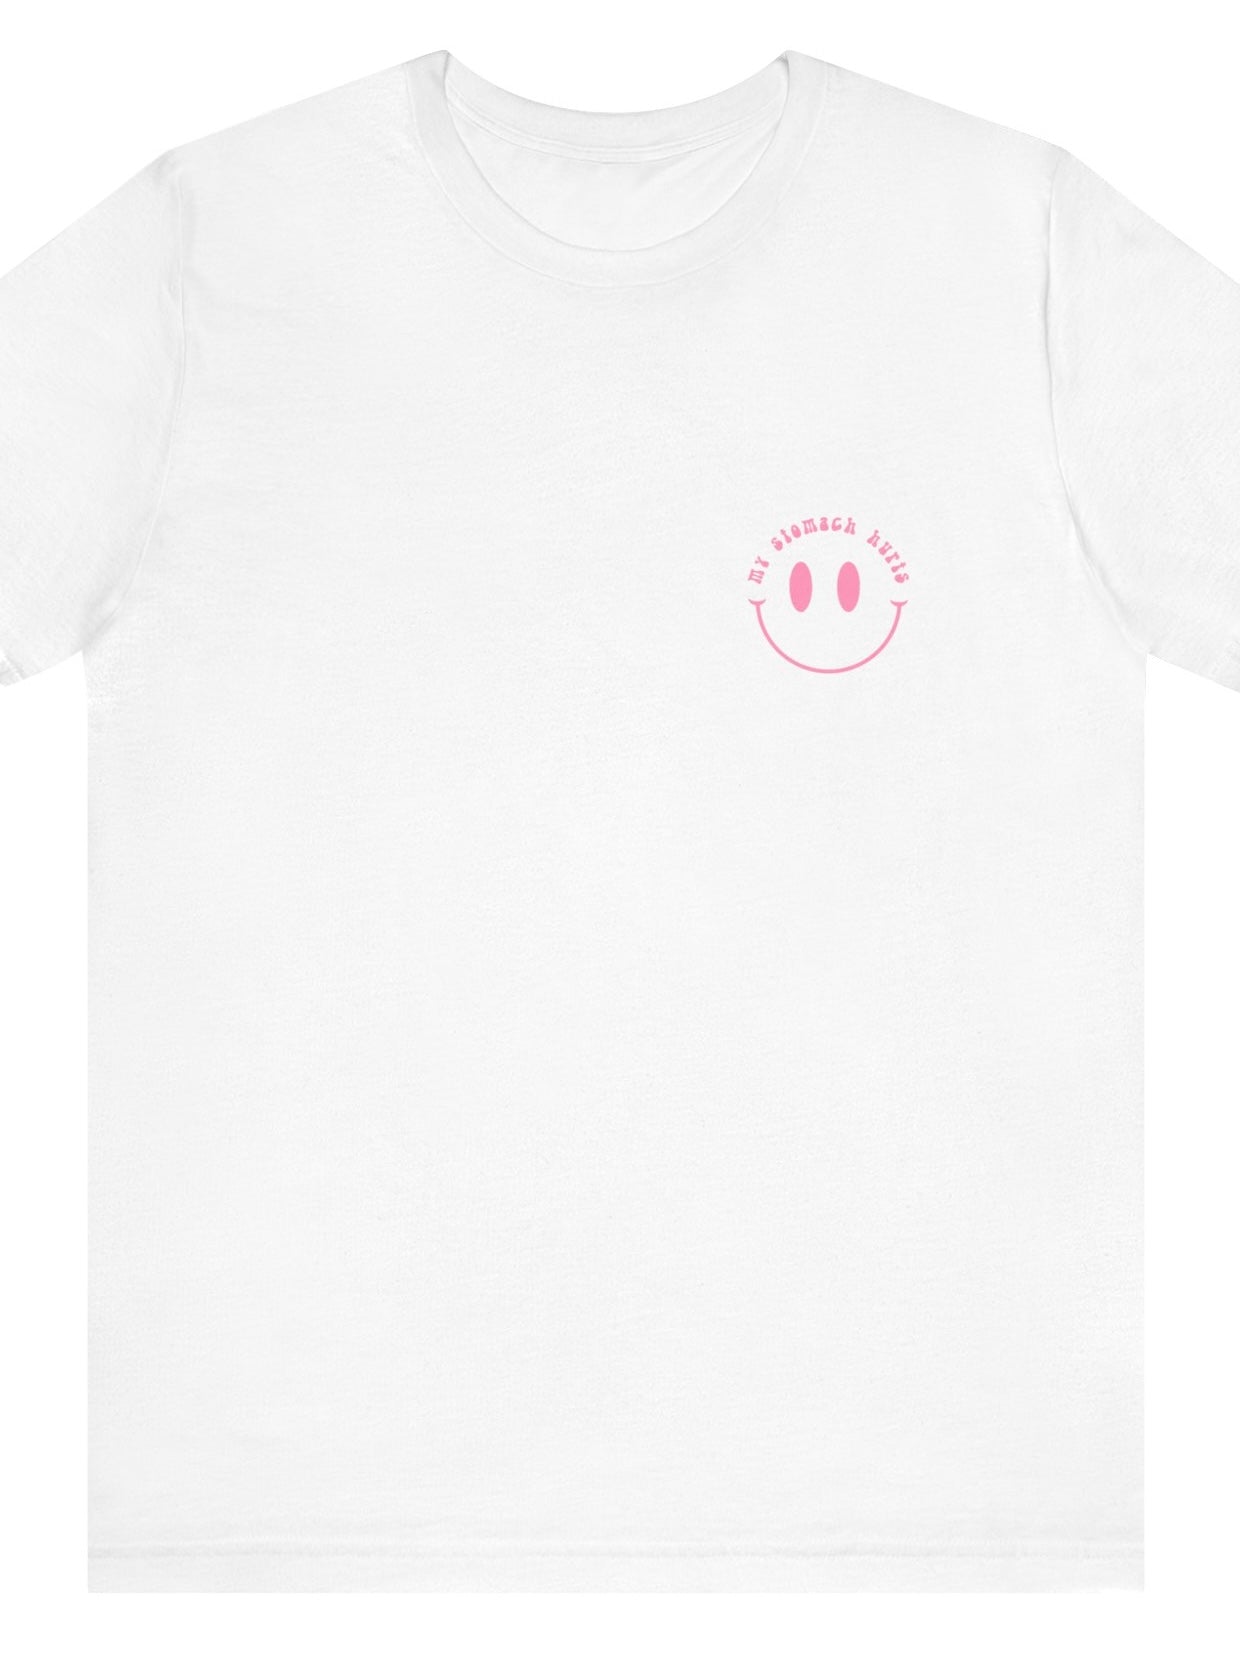 my stomach hurts tee - white with back design